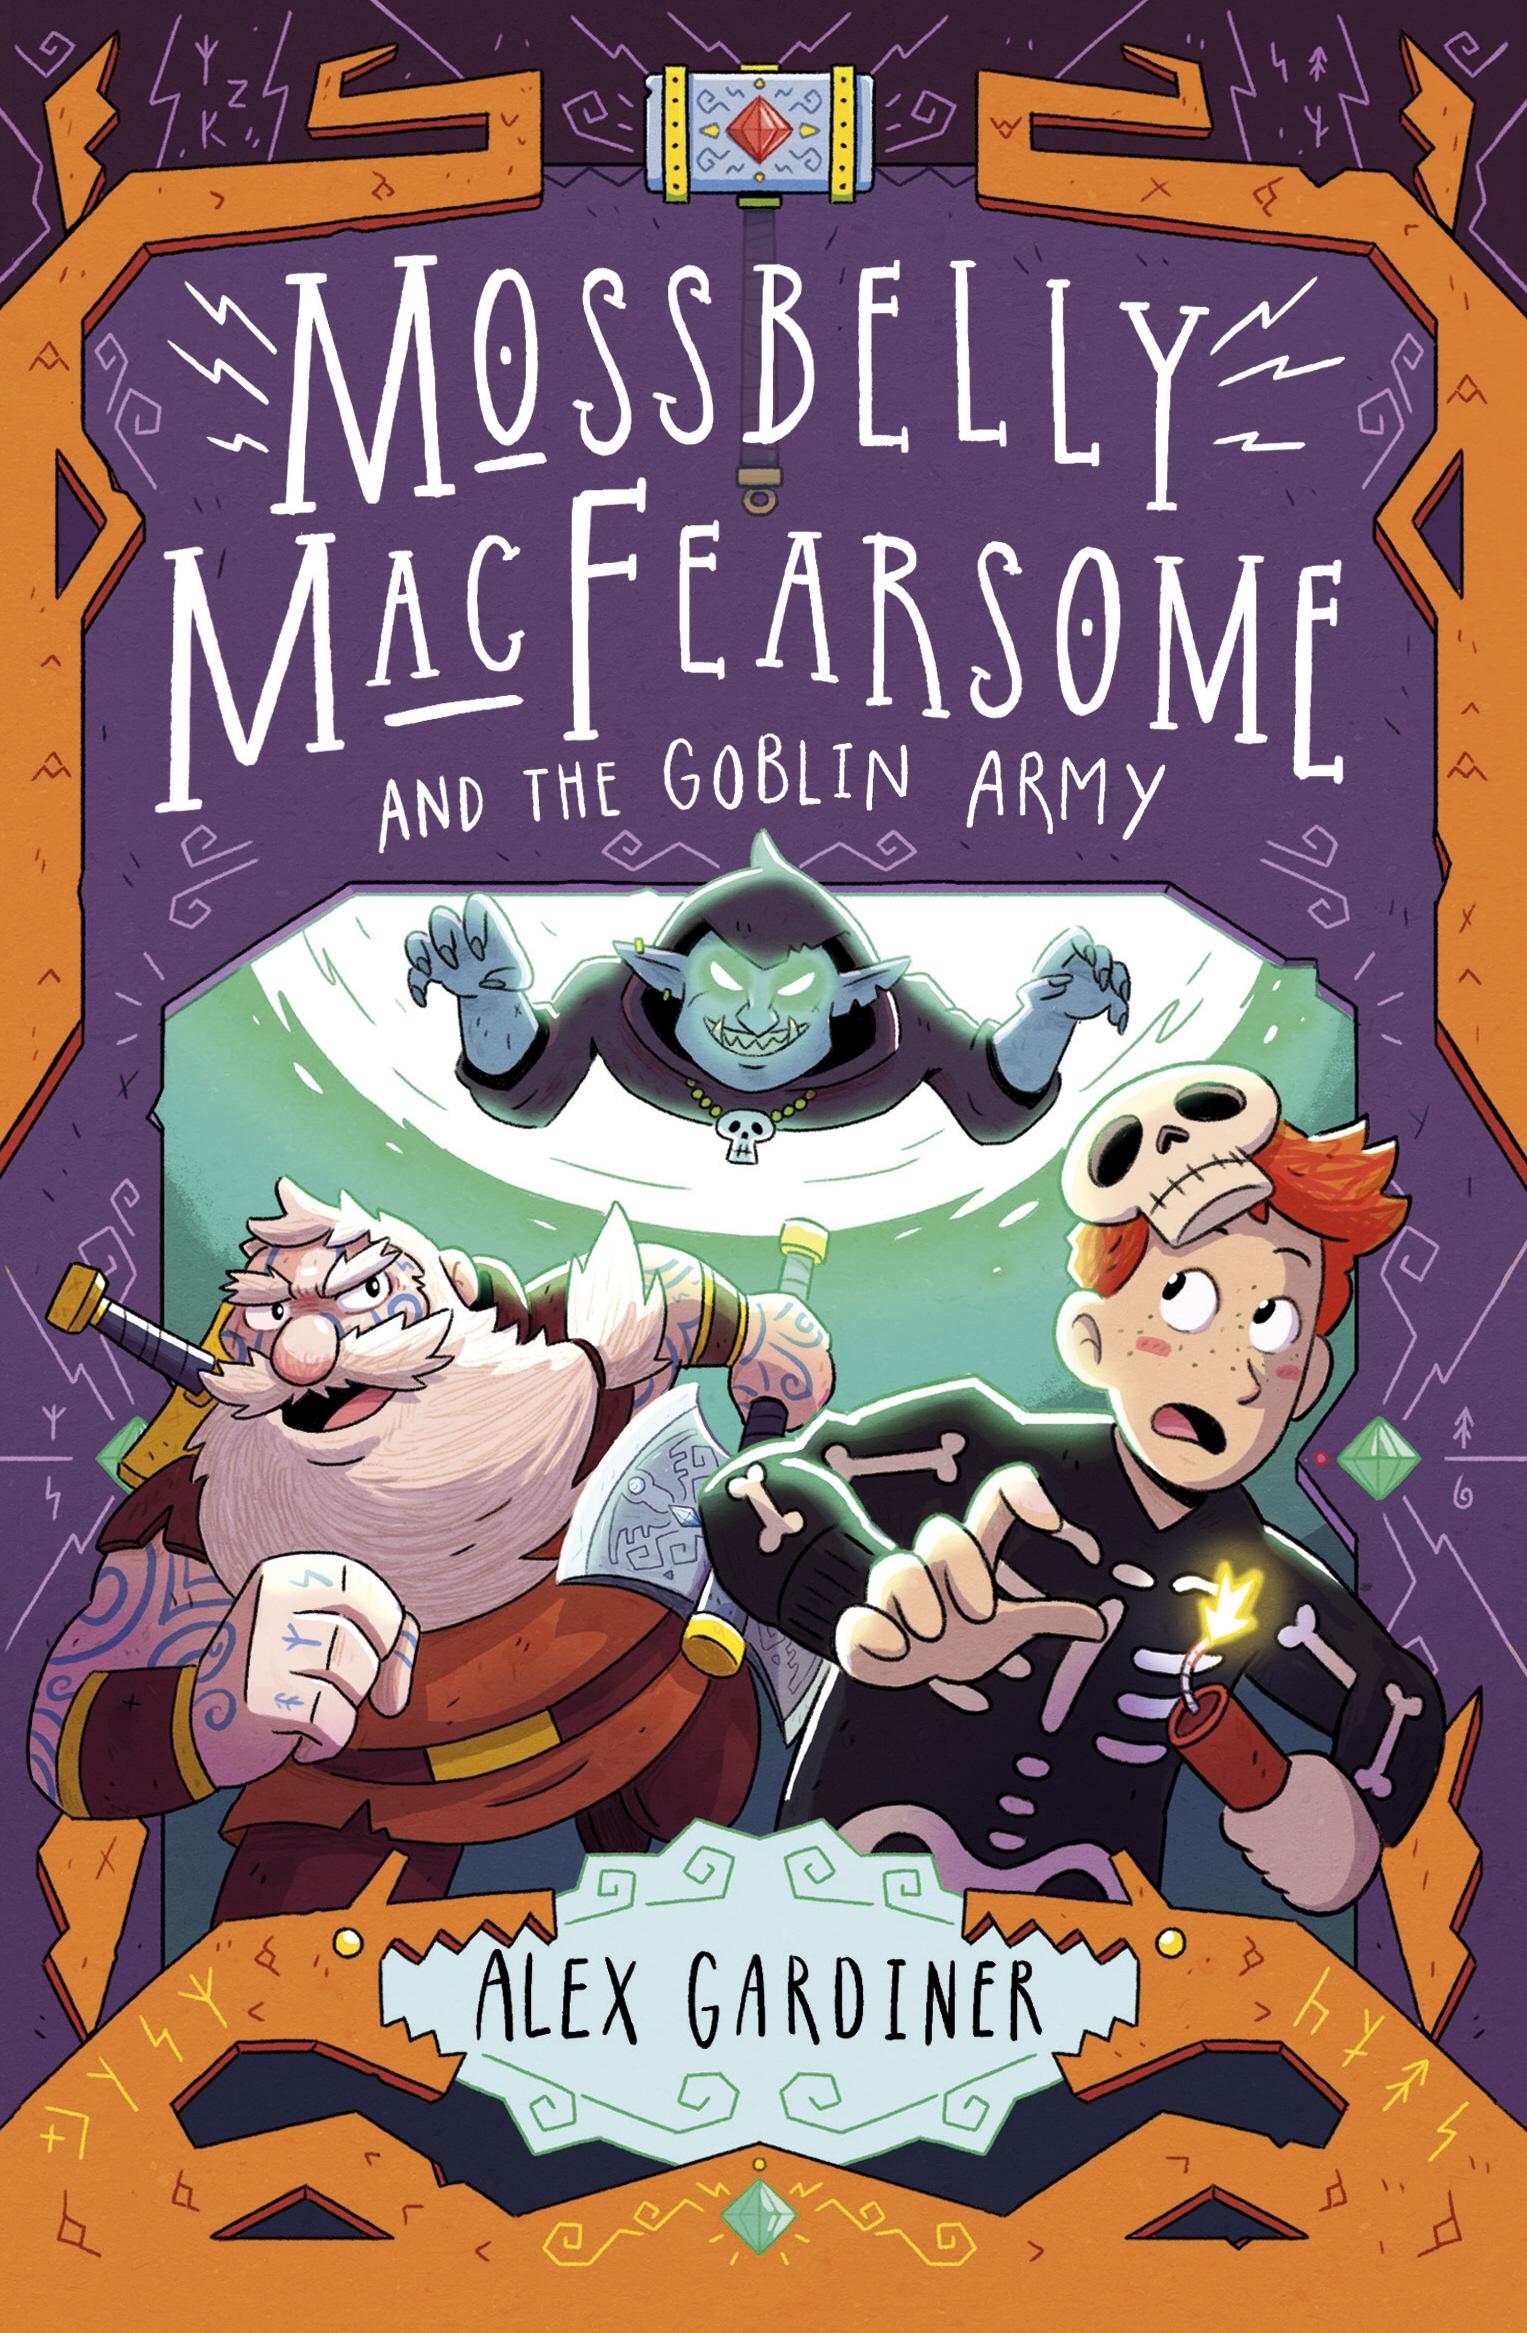 Mossbelly MacFearsome and the Goblin Army - Alex Gardiner